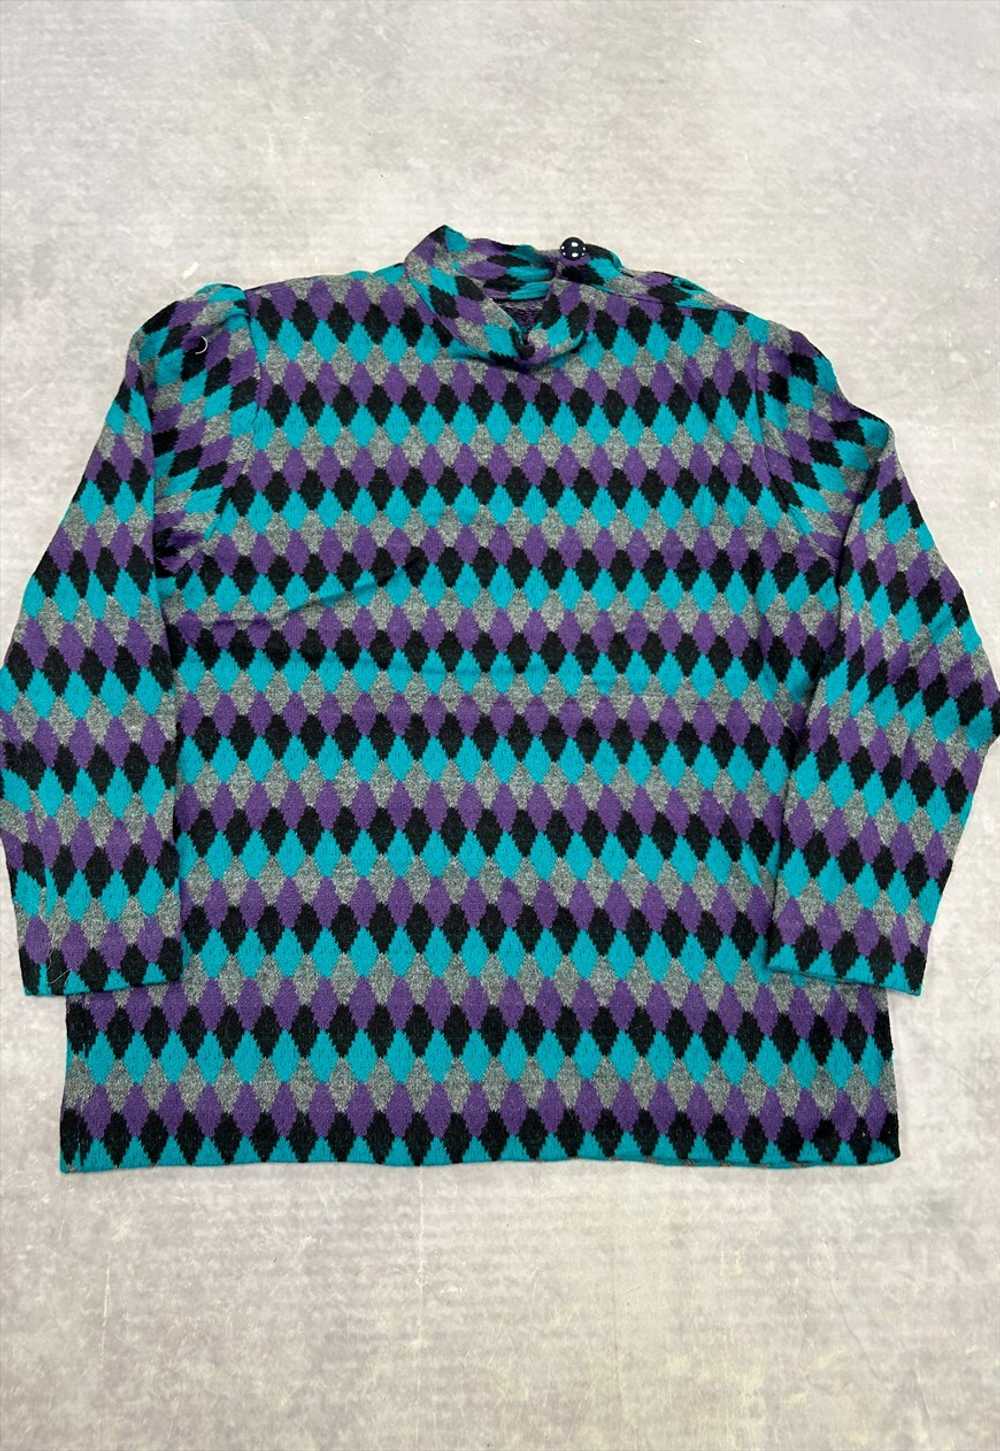 Vintage Knitted Jumper Fun Abstract Patterned Kni… - image 2